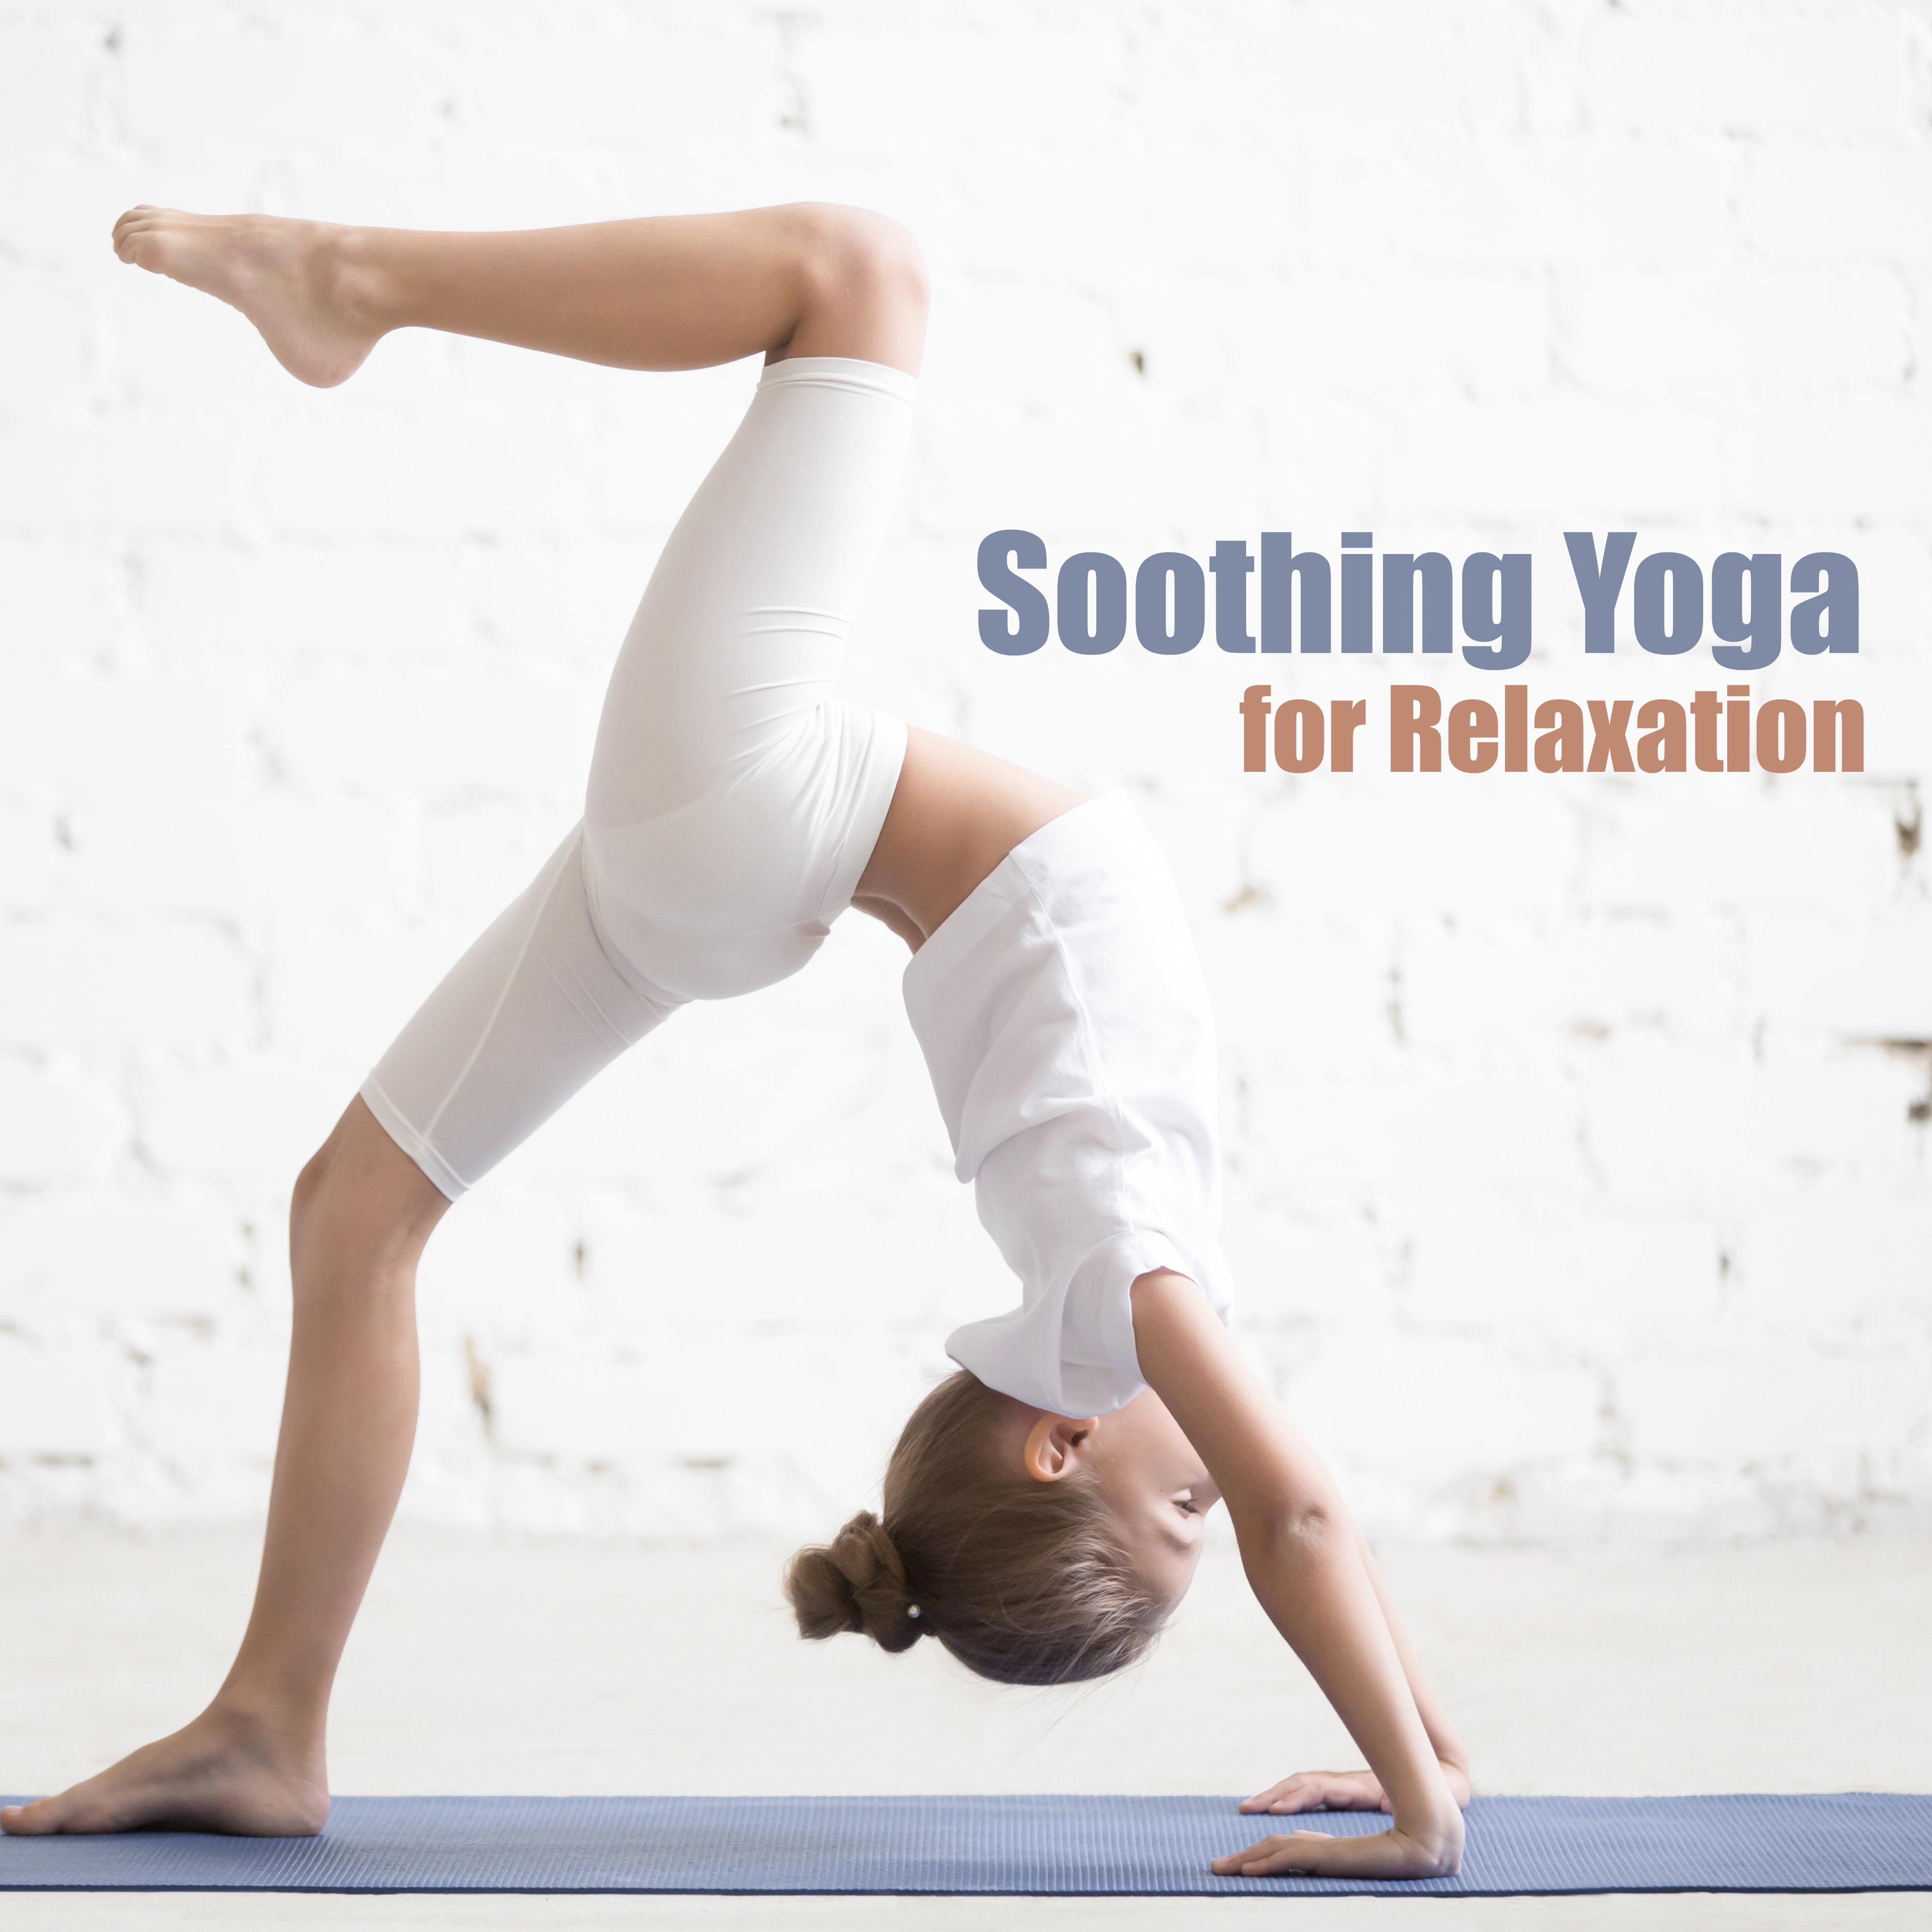 Soothing Yoga for Relaxation